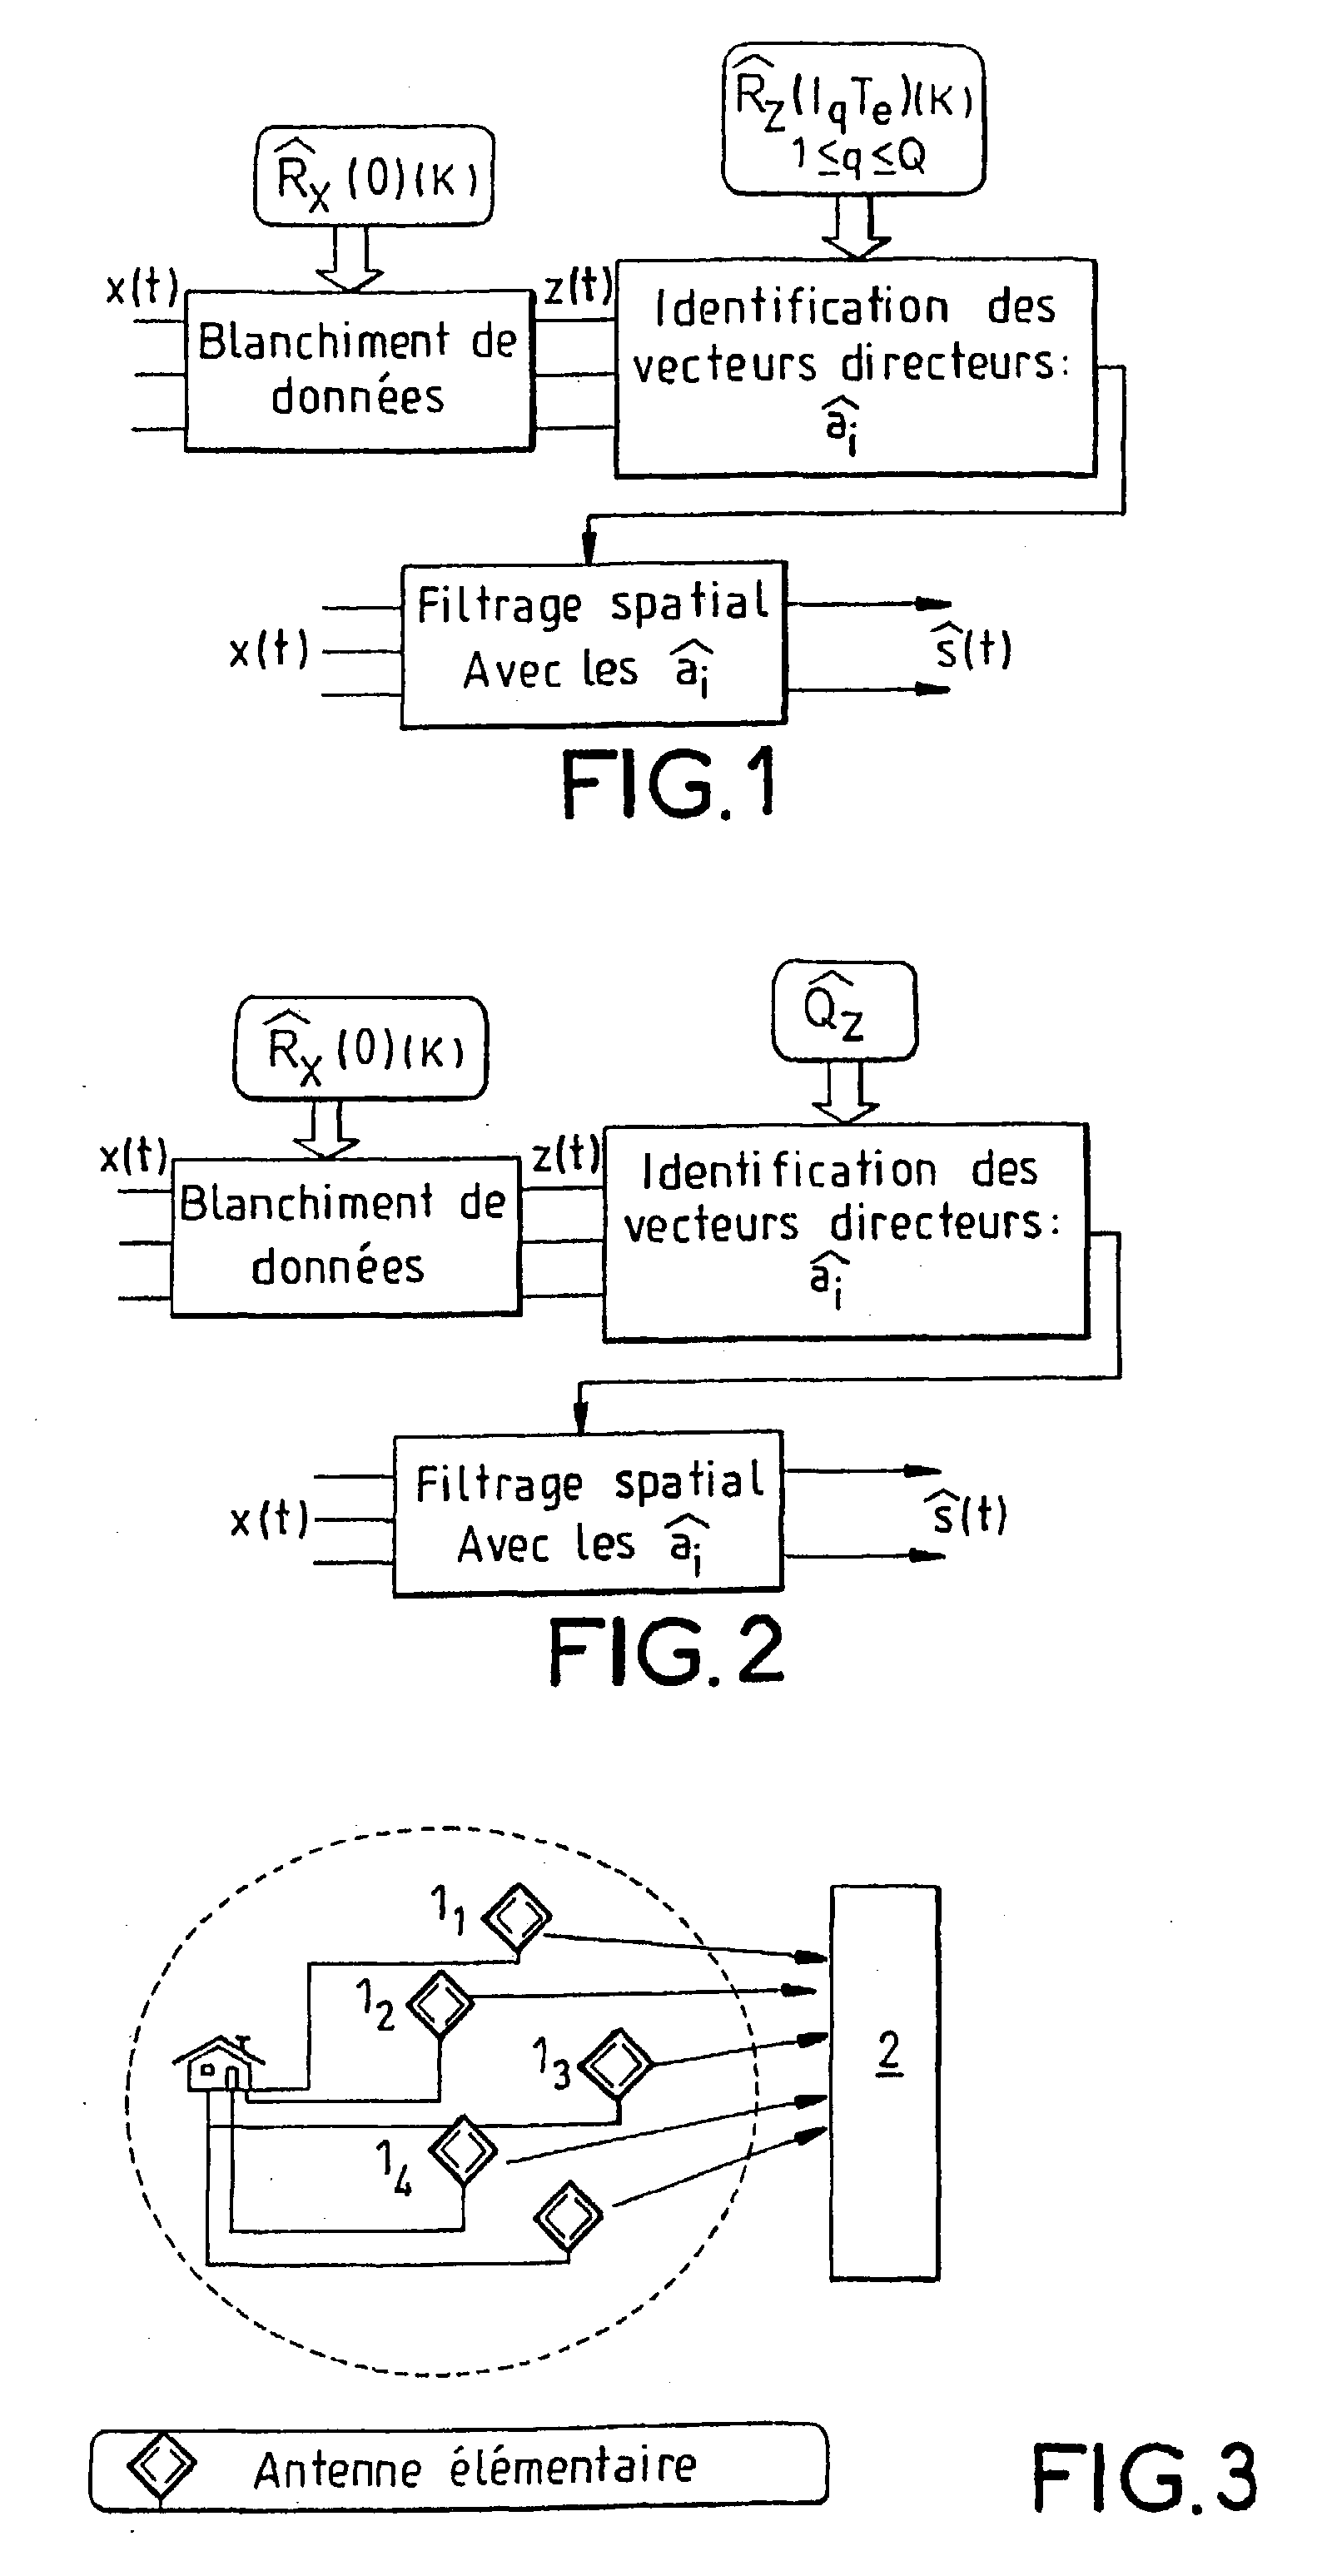 Antenna processing method for potentially non-centered cyclostationary signals